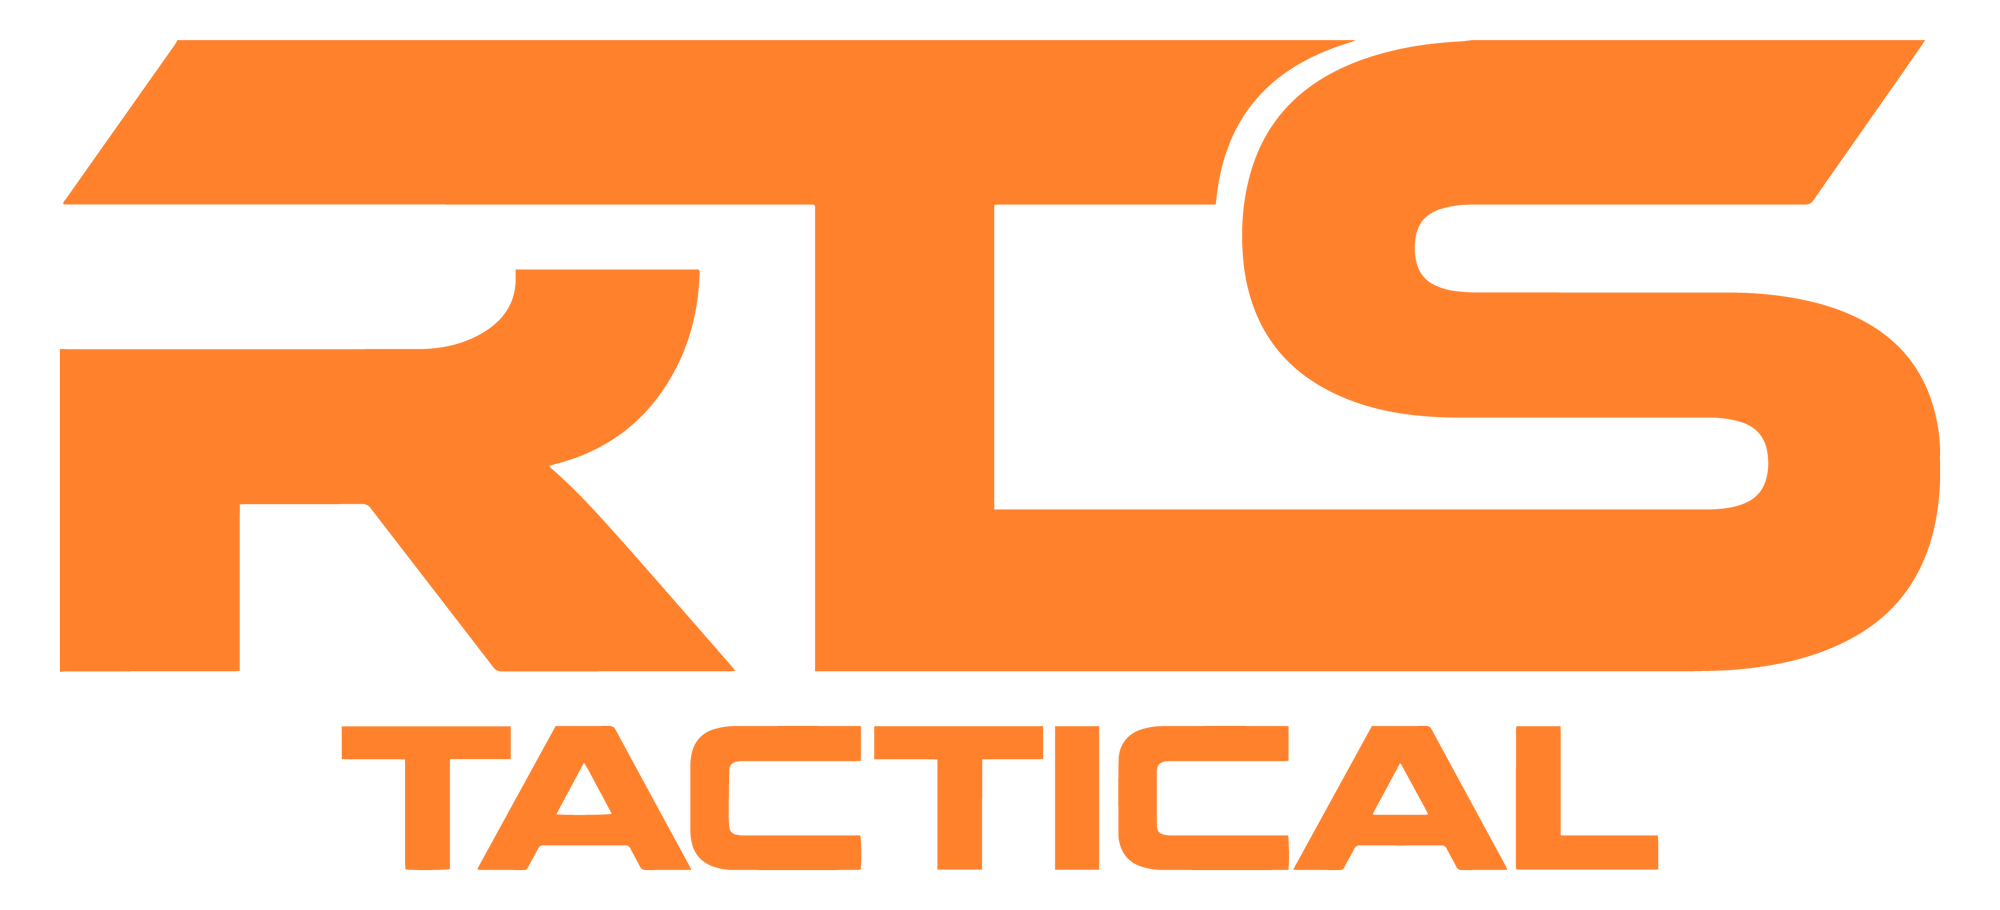 RTS Tactical, leaders in Body Armor & Tactical Gear Manufacturing.